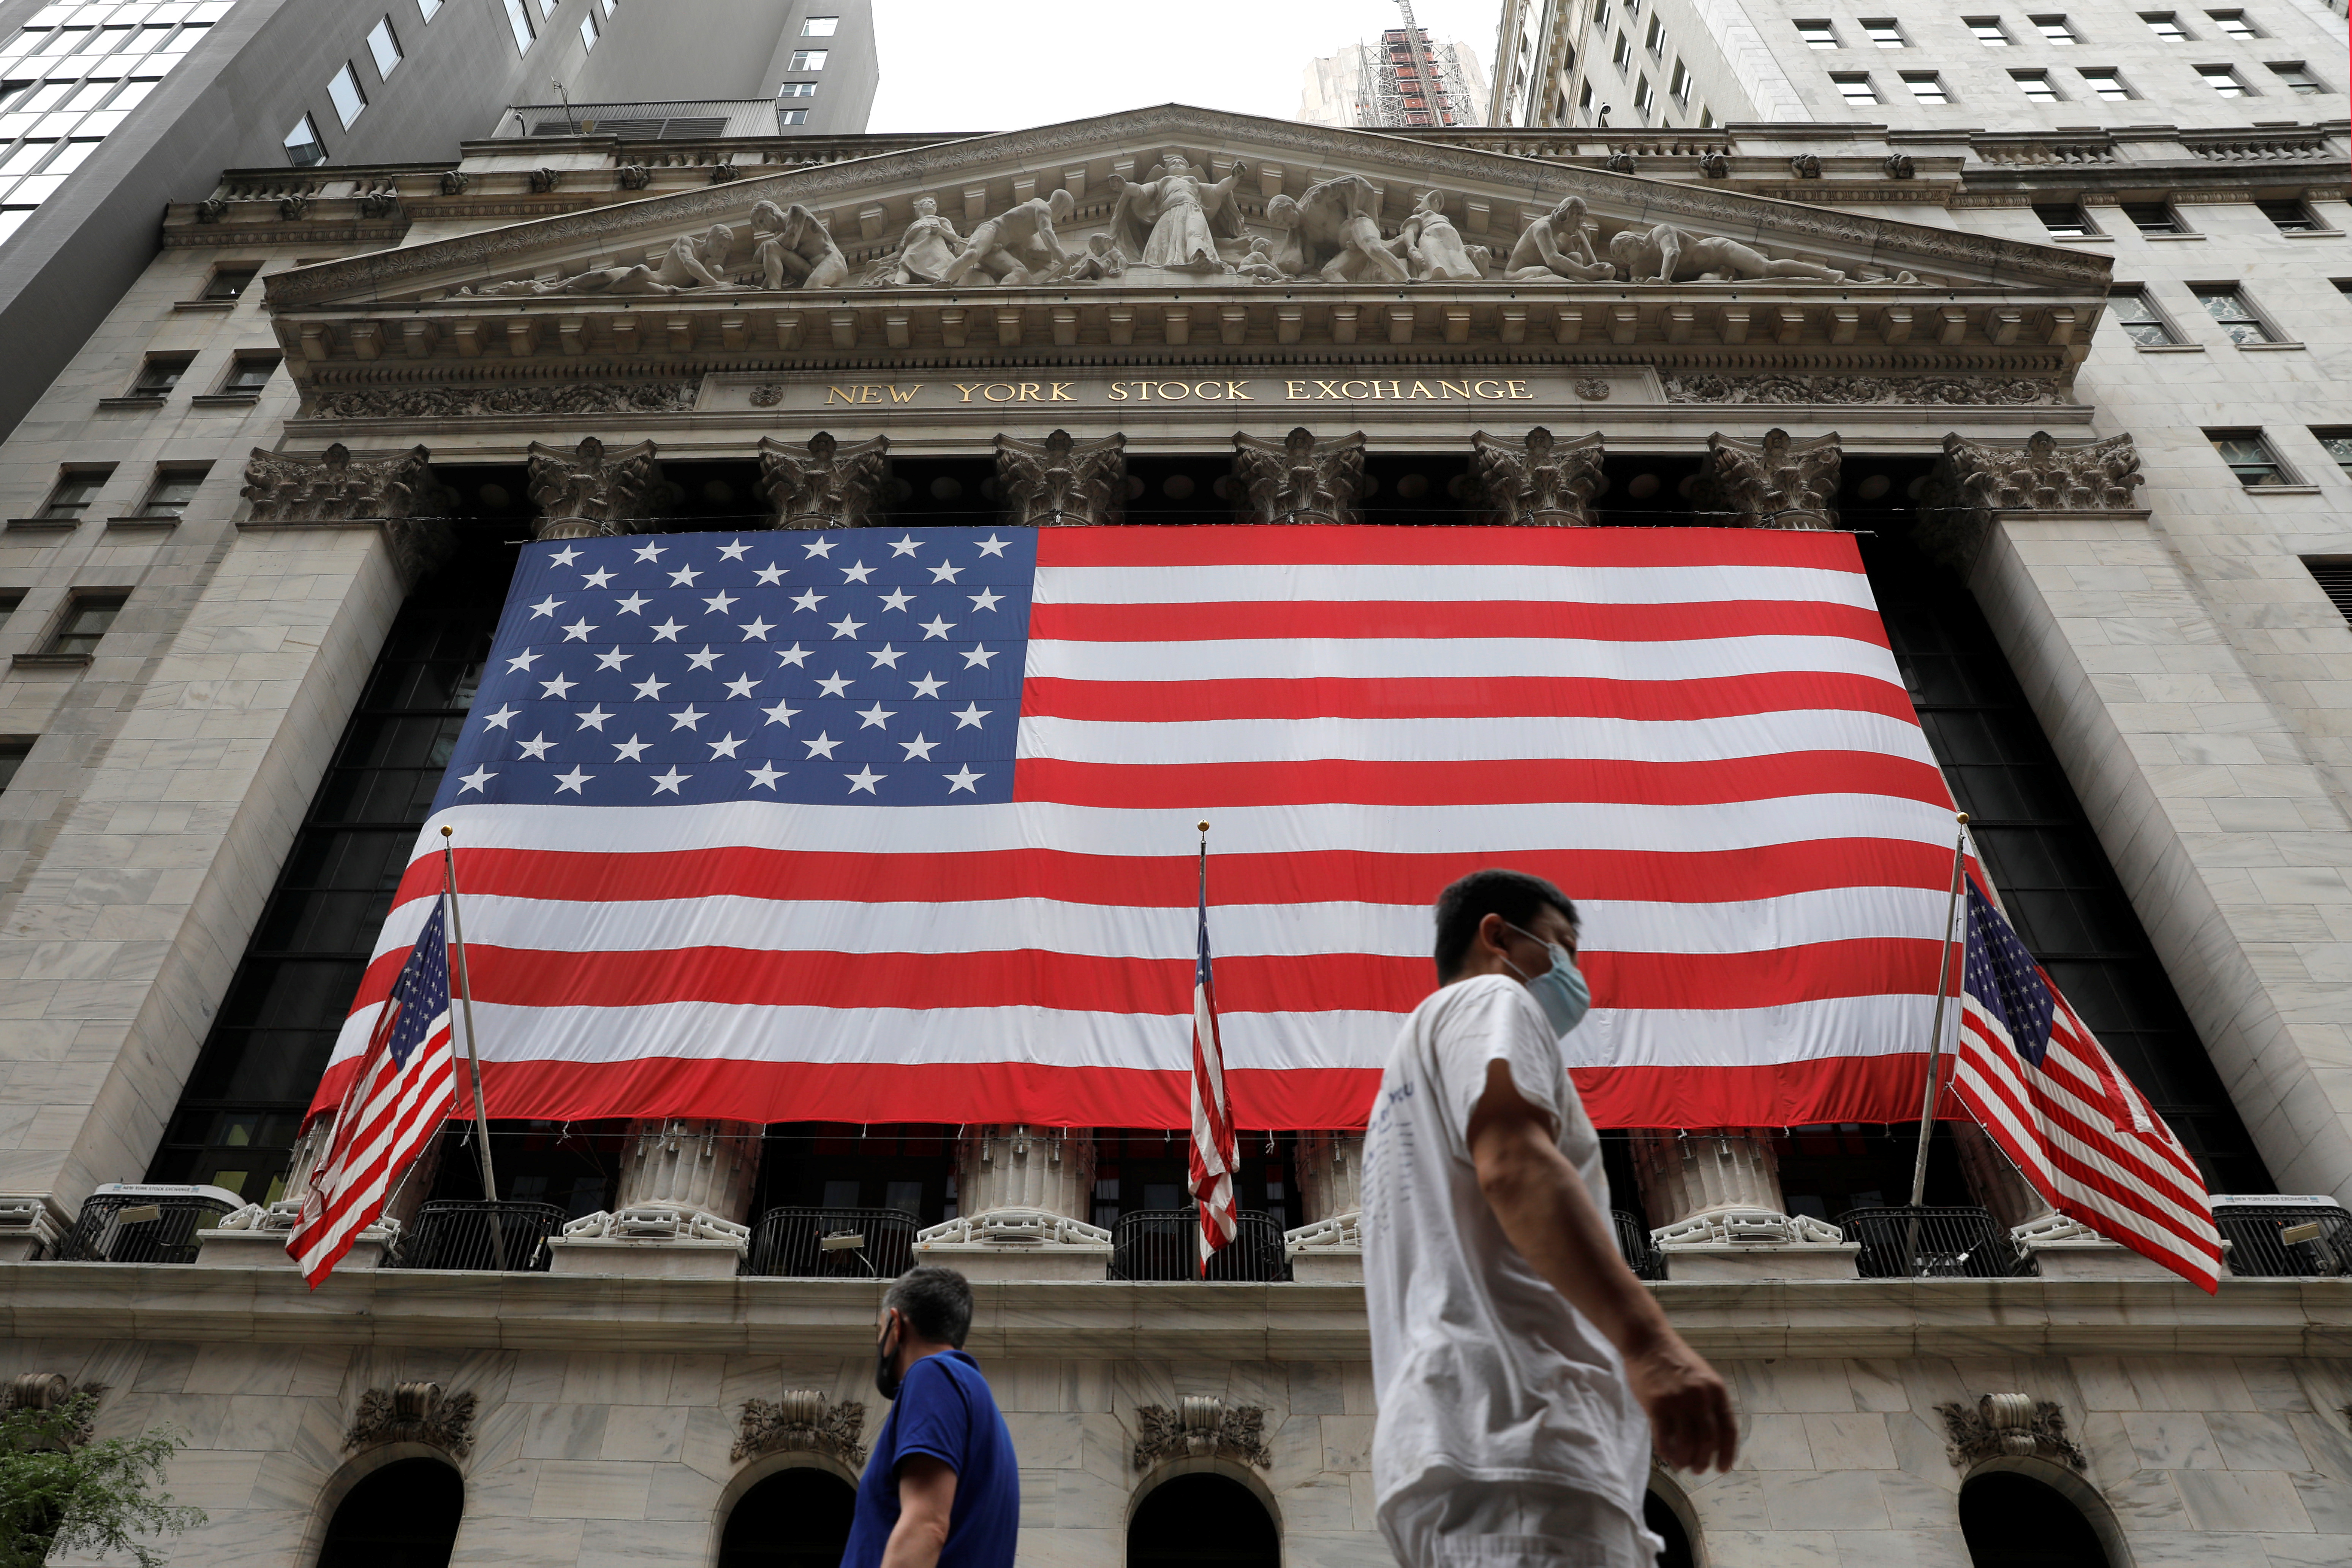 People walk by the New York Stock Exchange (NYSE) in Manhattan, New York City, U.S., August 9, 2021. REUTERS/Andrew Kelly